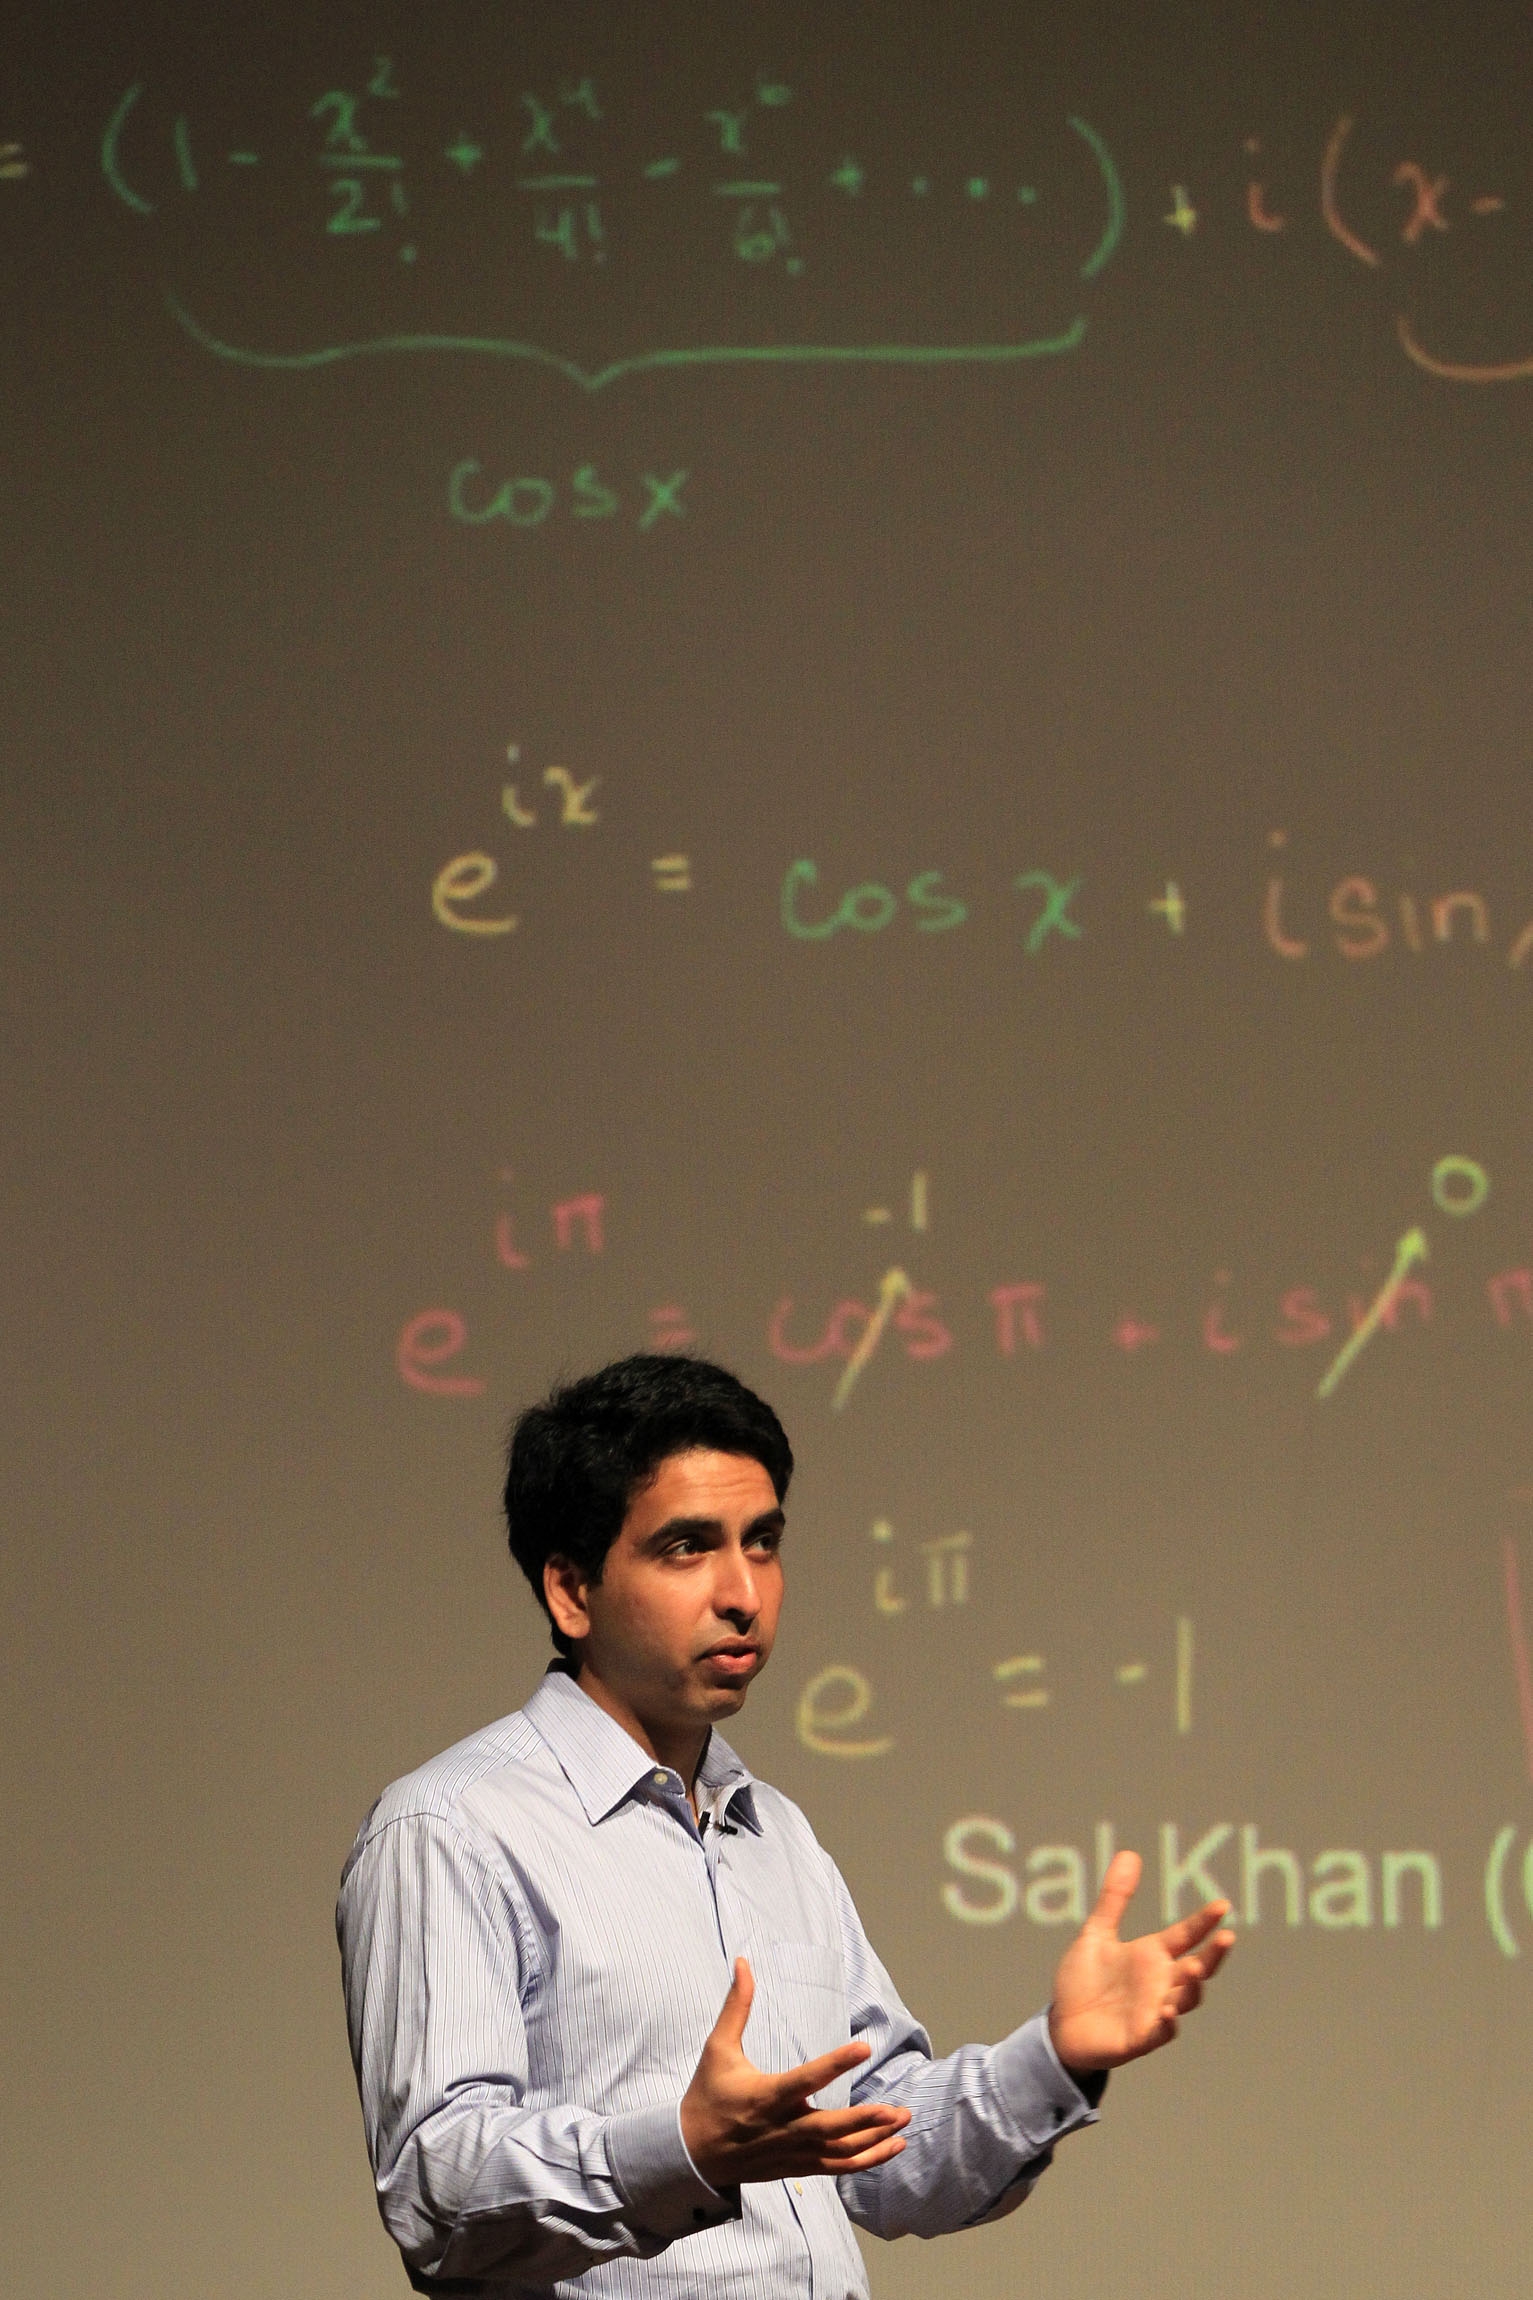 Salman Khan, educator and Khan Academy founder Sal Khan is a true education pioneer. He started by posting a math lesson, but his impact on education might truly be incalculable.  —philanthropist Bill Gates